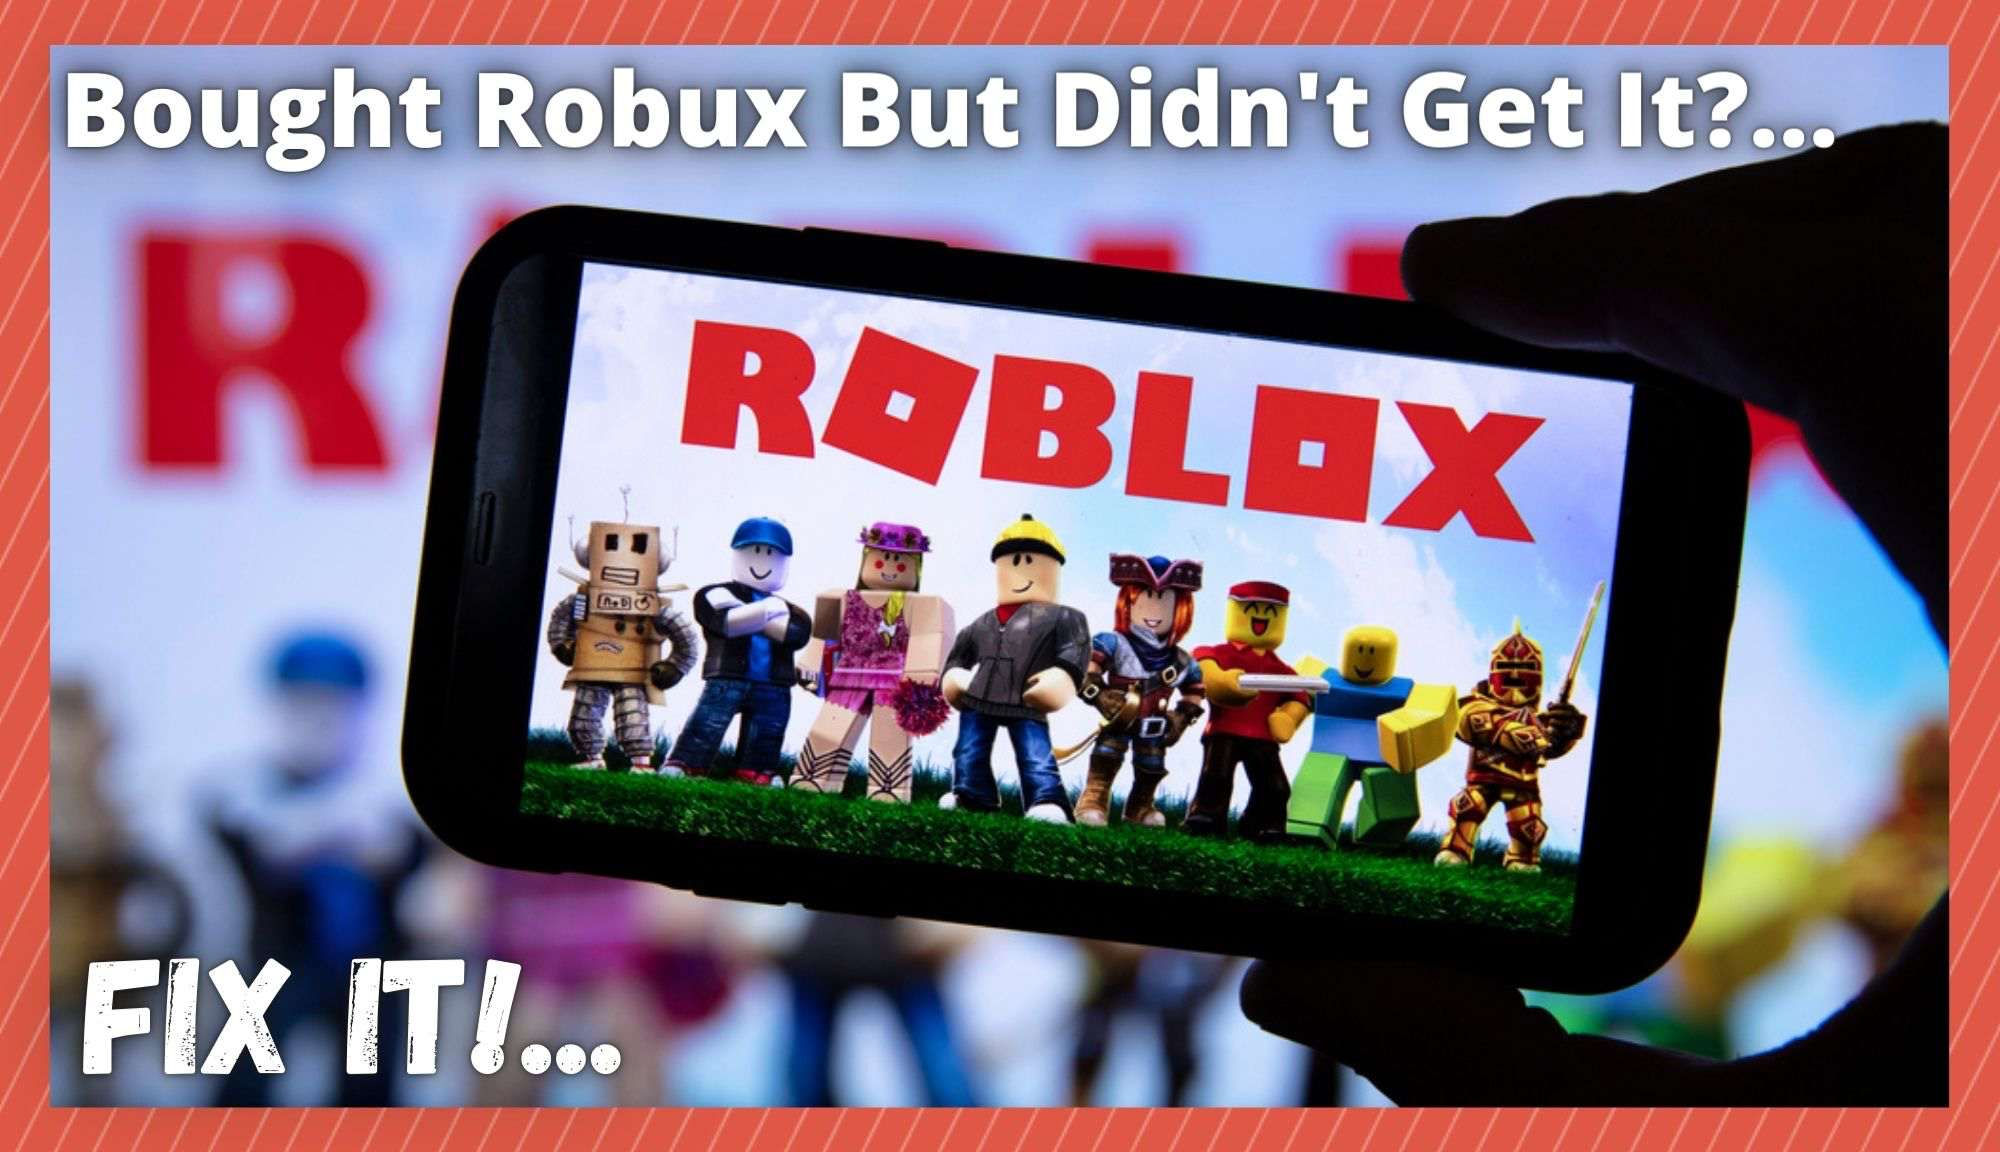 I Bought Robux But Didn't Get It